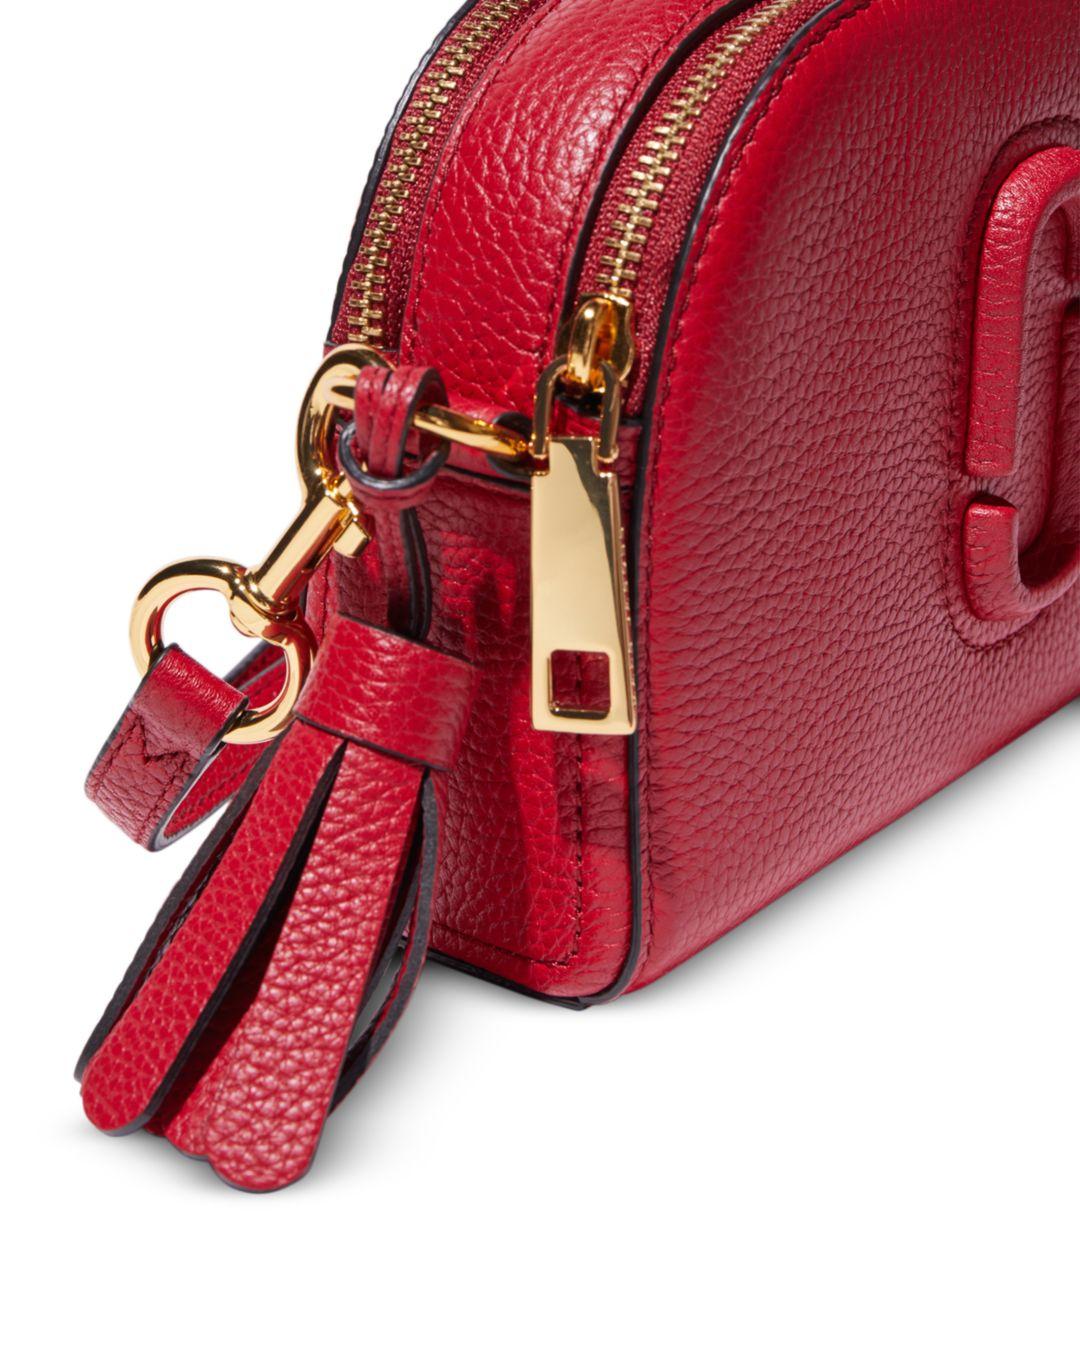 Marc Jacobs Shutter Leather Crossbody in Red - Lyst